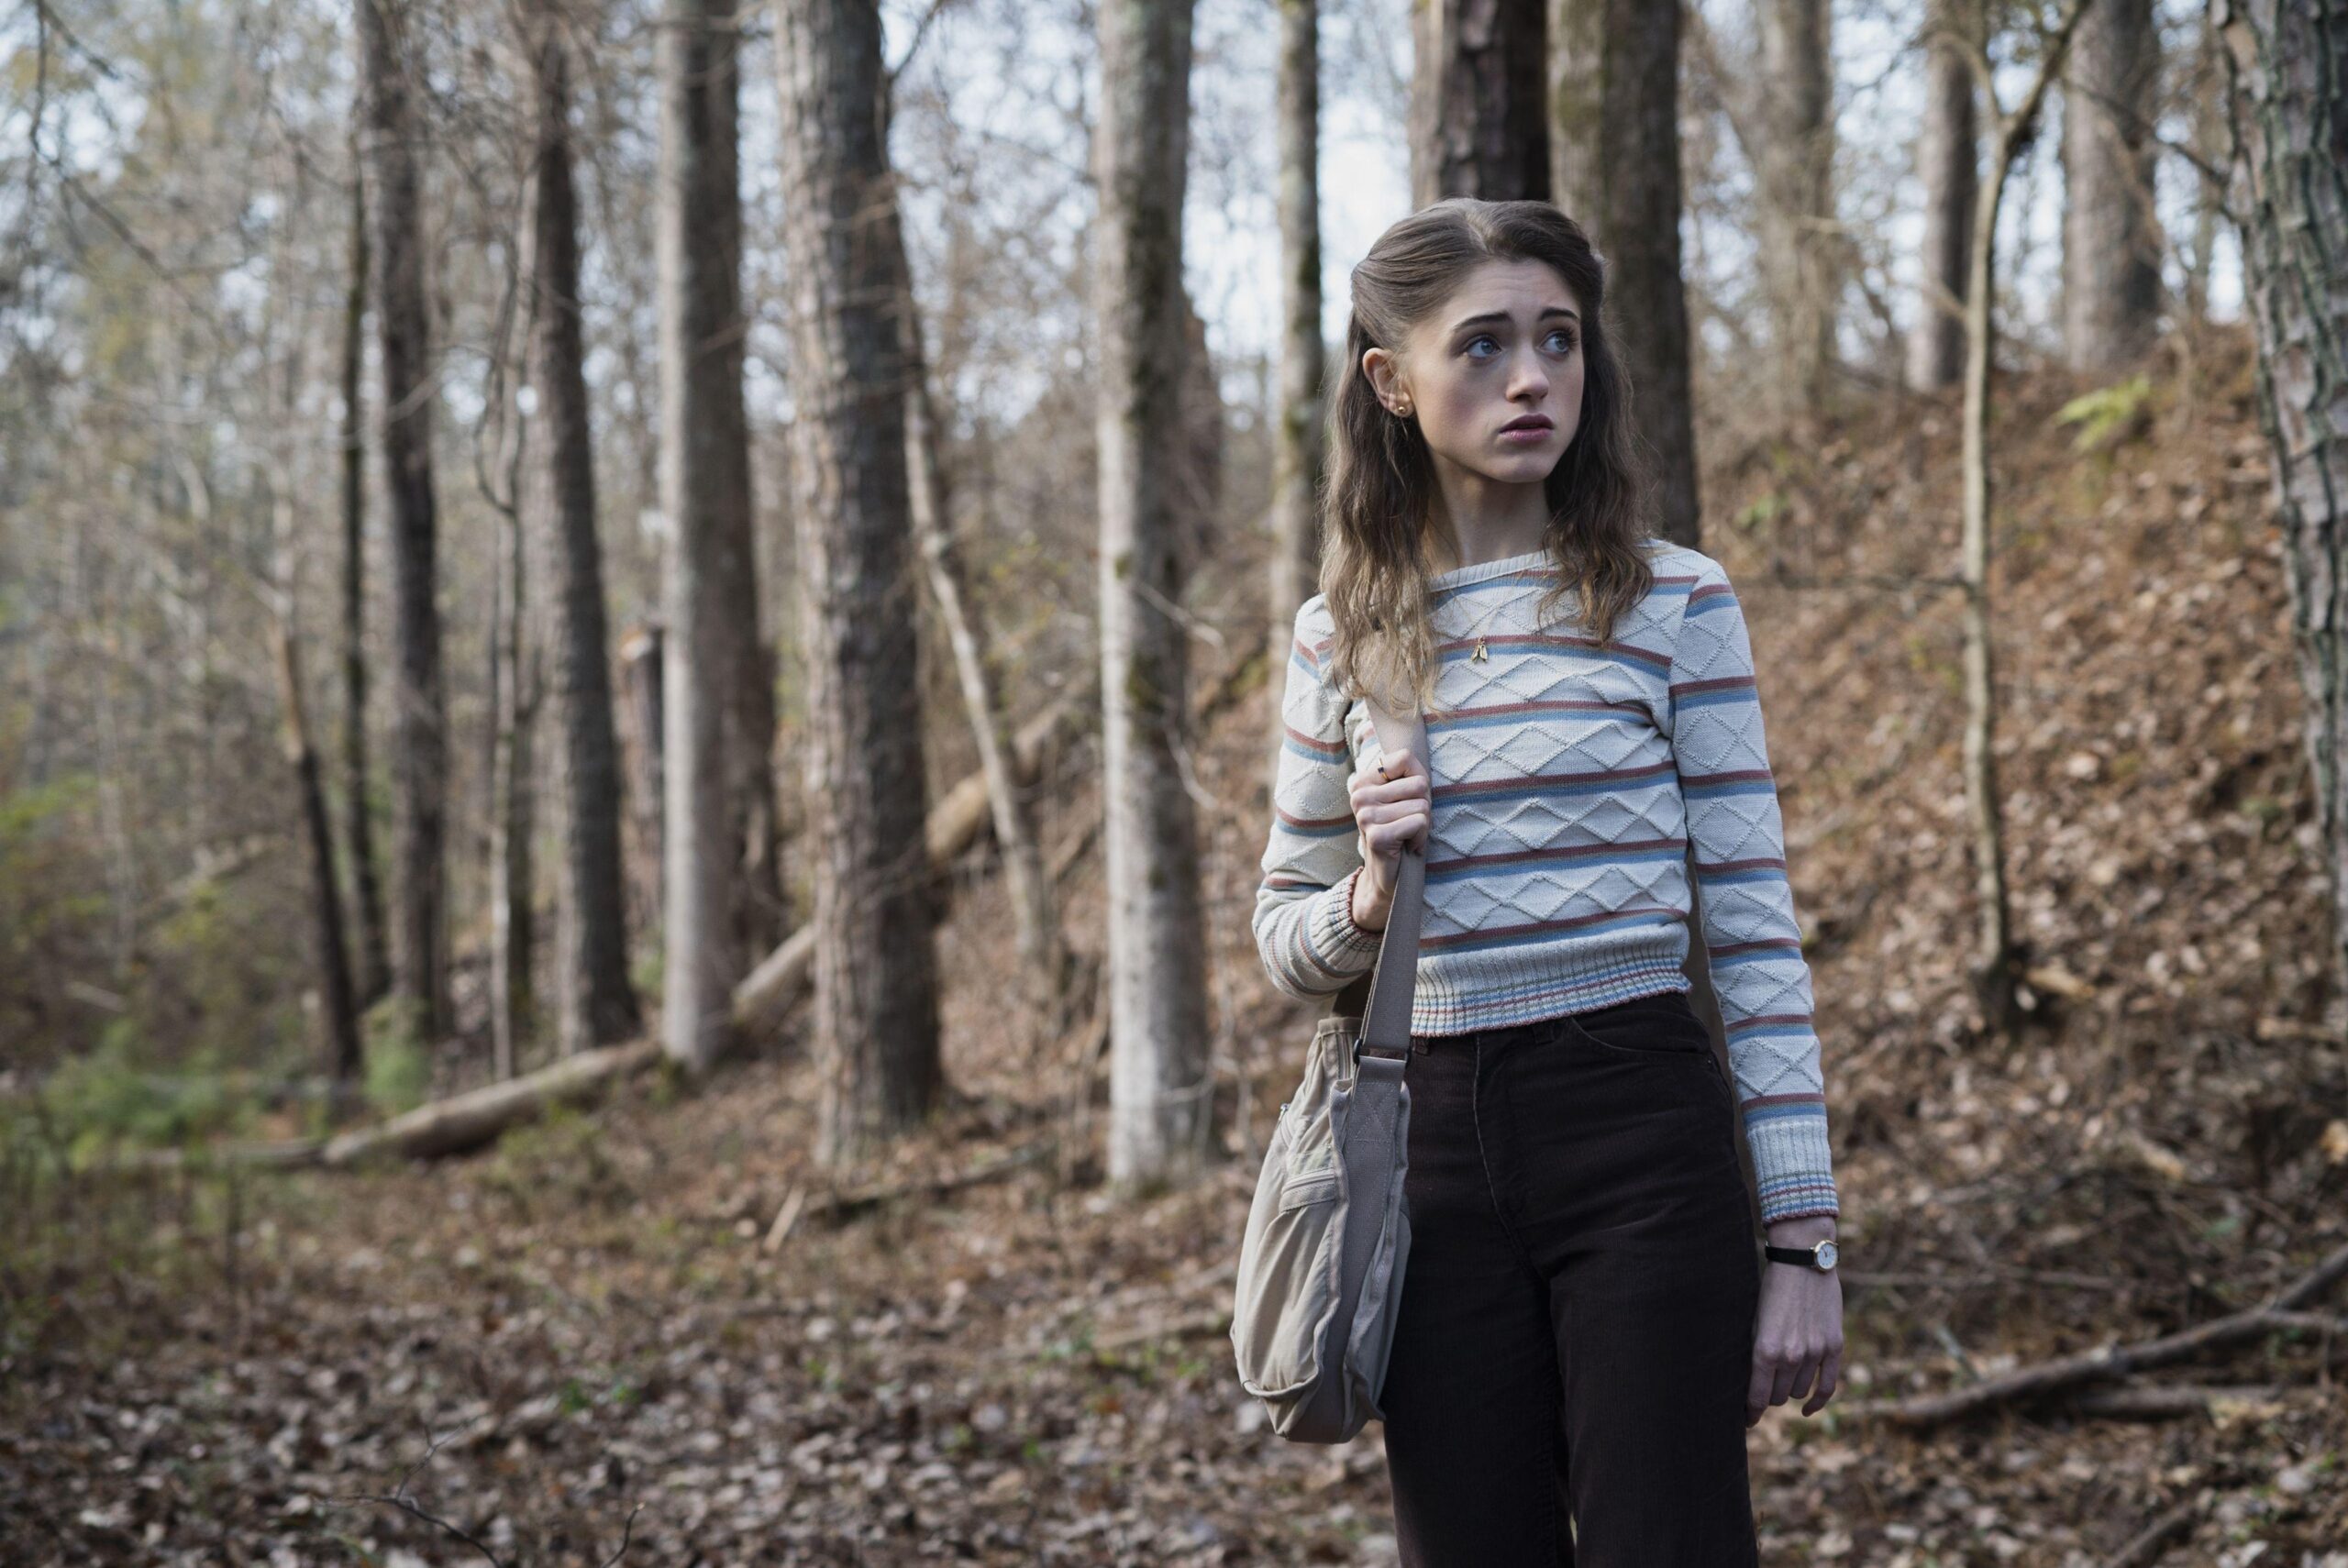 I want to facefuck Natalia Dyer and hear the sounds